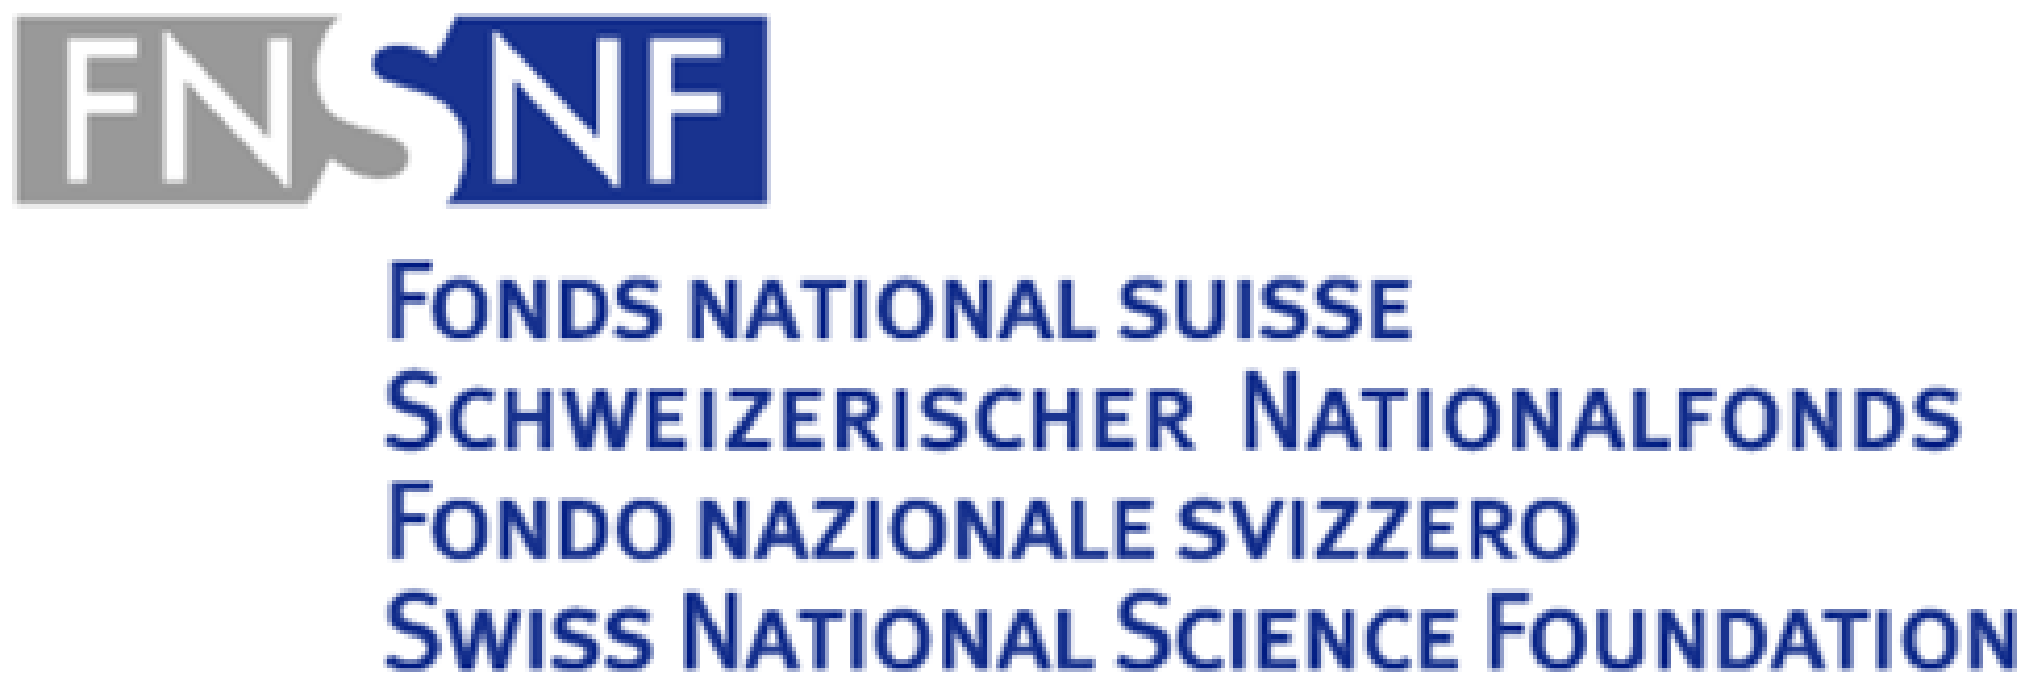 Funding from Swiss National Science Foundation will support two fellowships at C-EENRG on energy and environmental policy